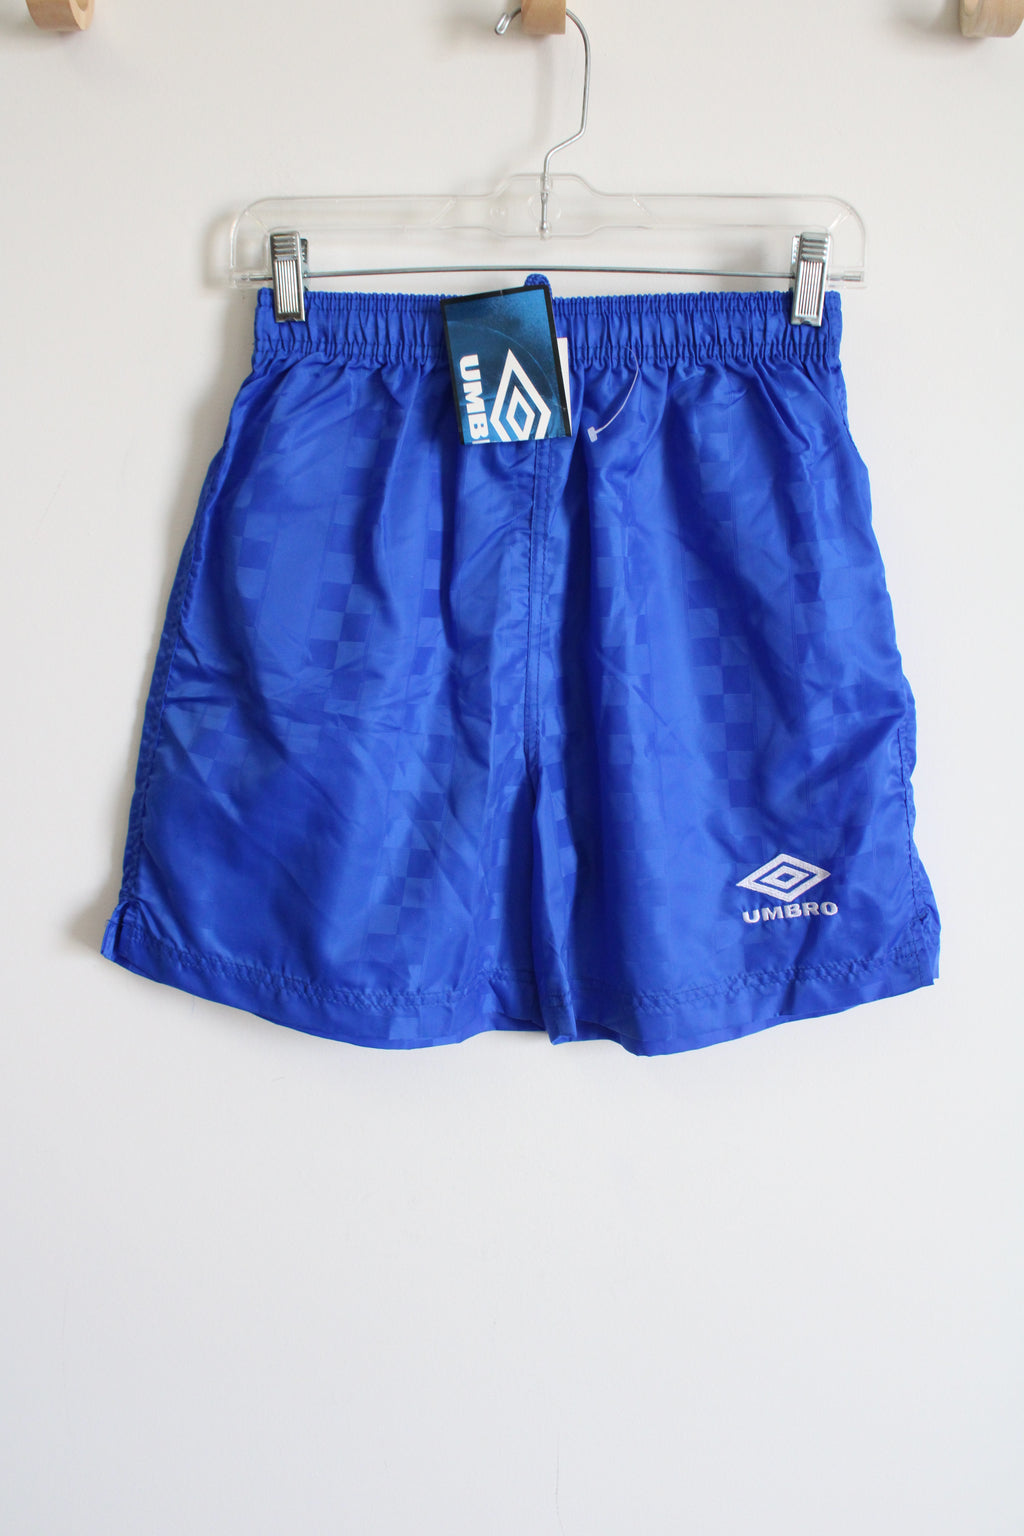 NEW Umbro Blue Check Shorts | Youth L (11/12)